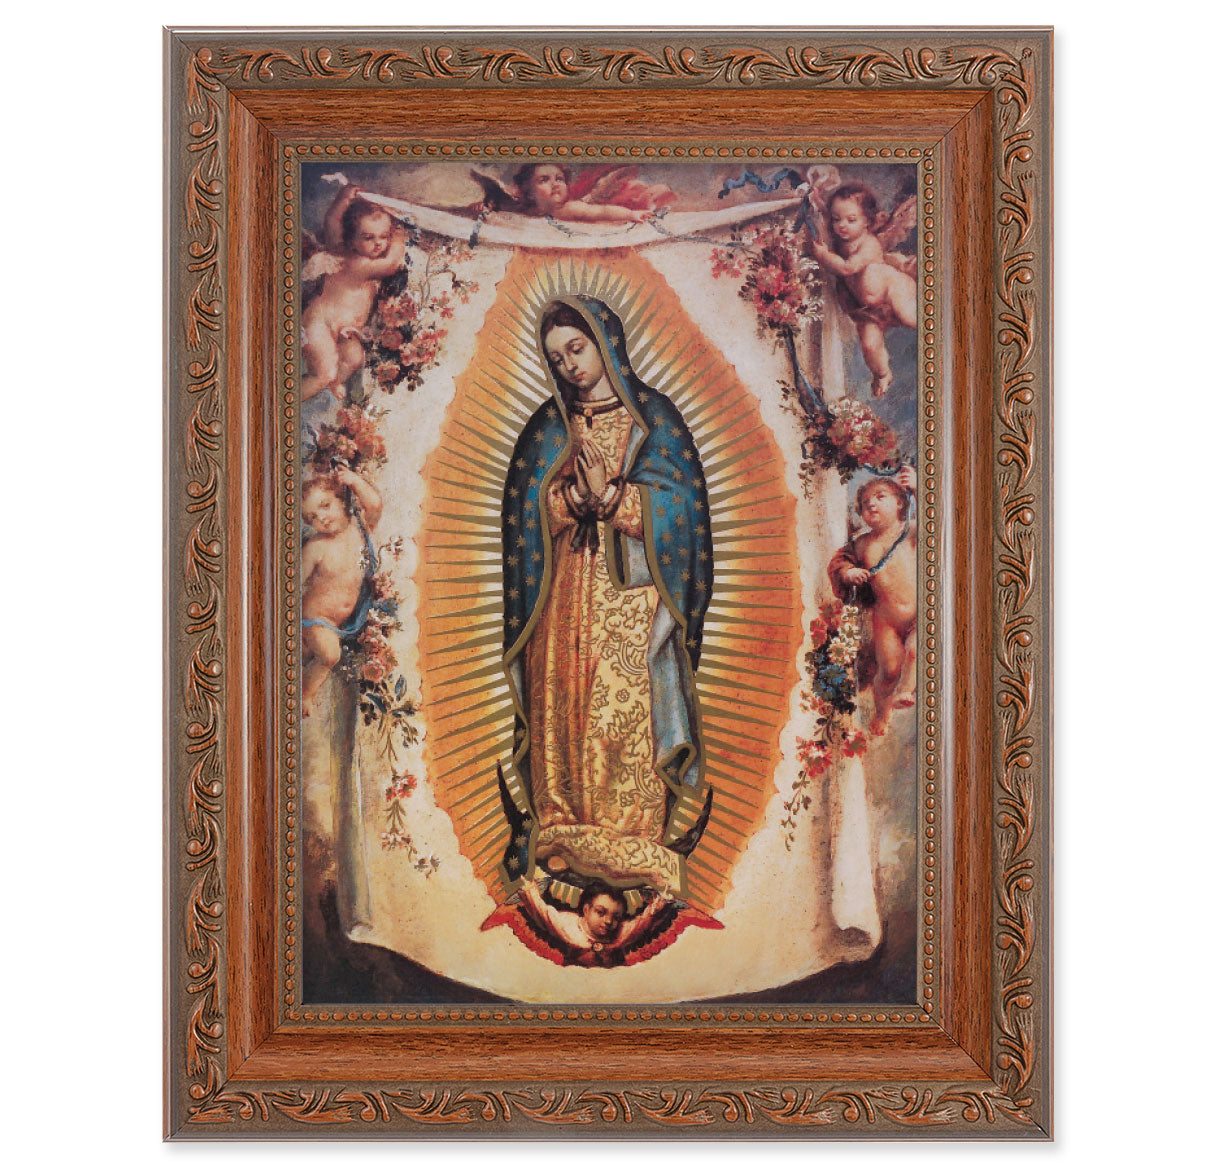 Our Lady of Guadalupe with Angels Mahogany Finish Framed Art